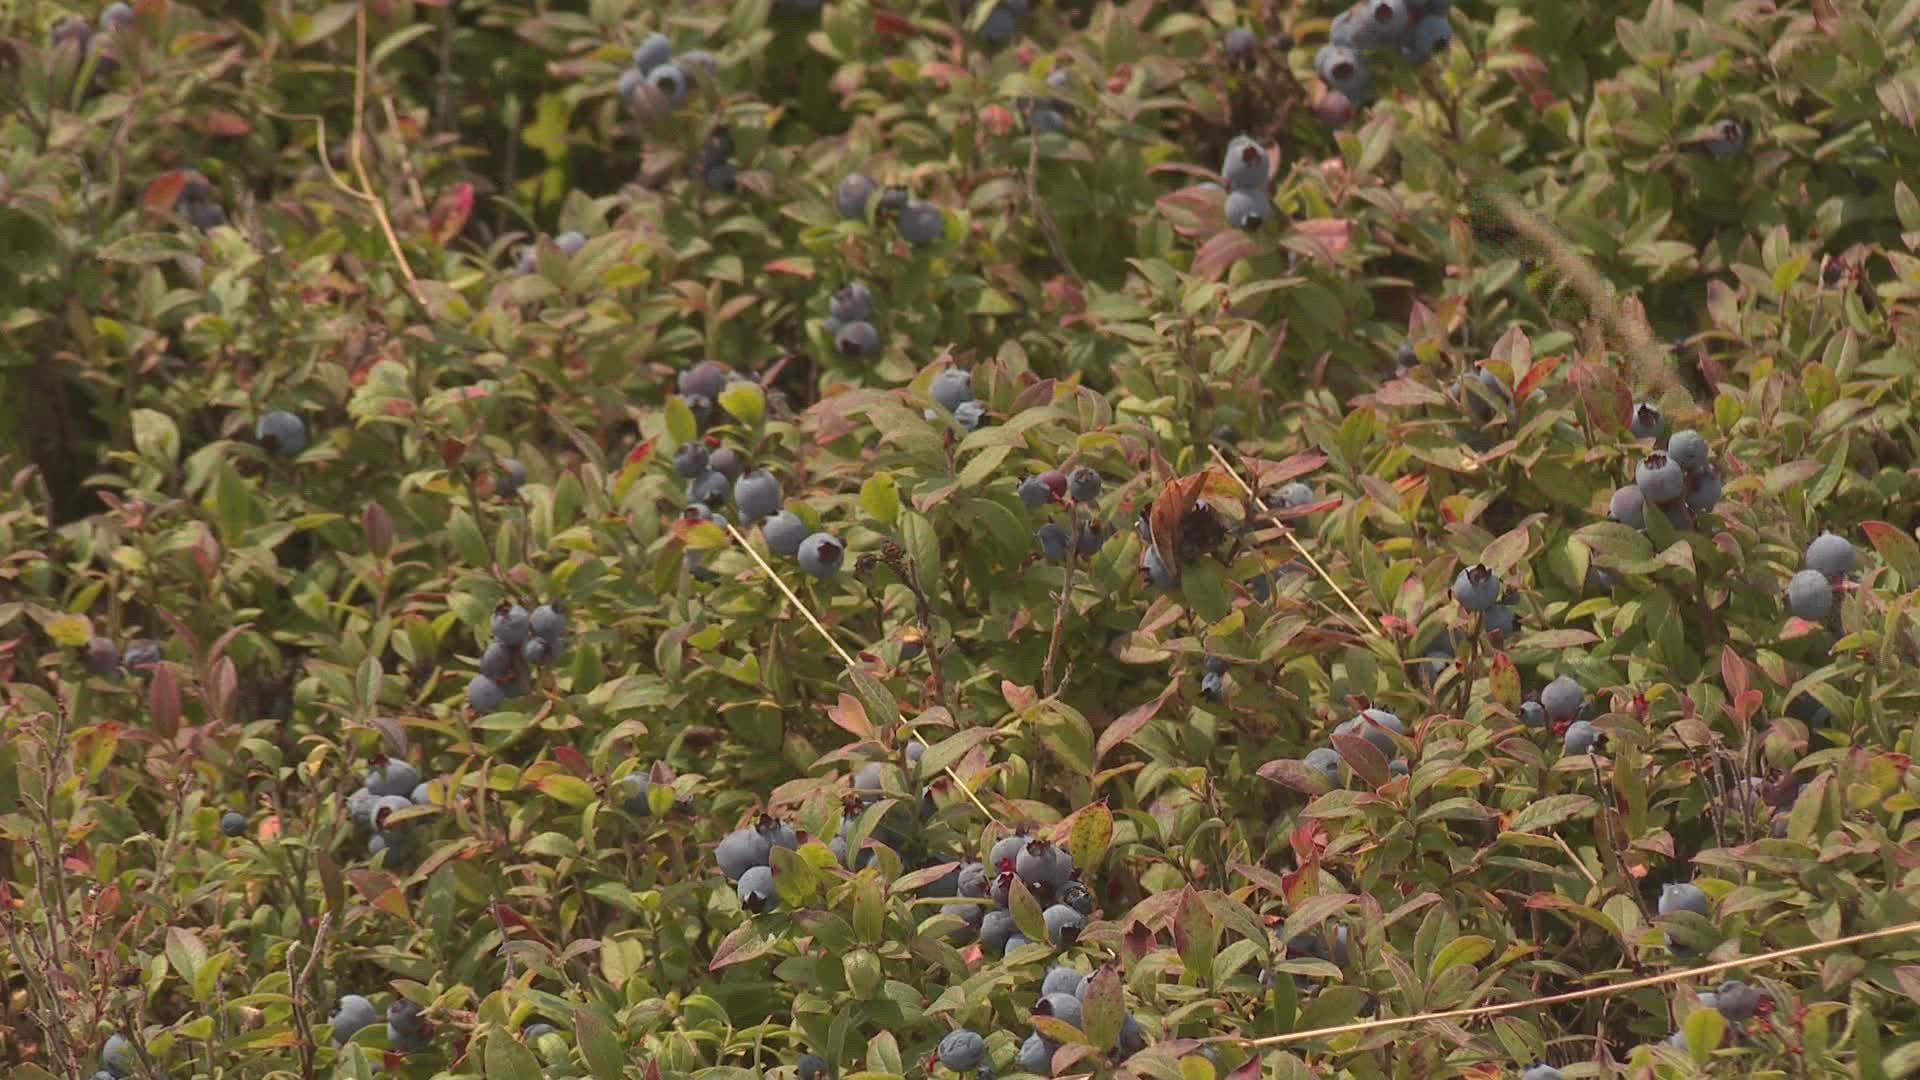 Leaders of The Maine Wild Blueberry Commission say they hope the weekend becomes an annual tradition each summer.